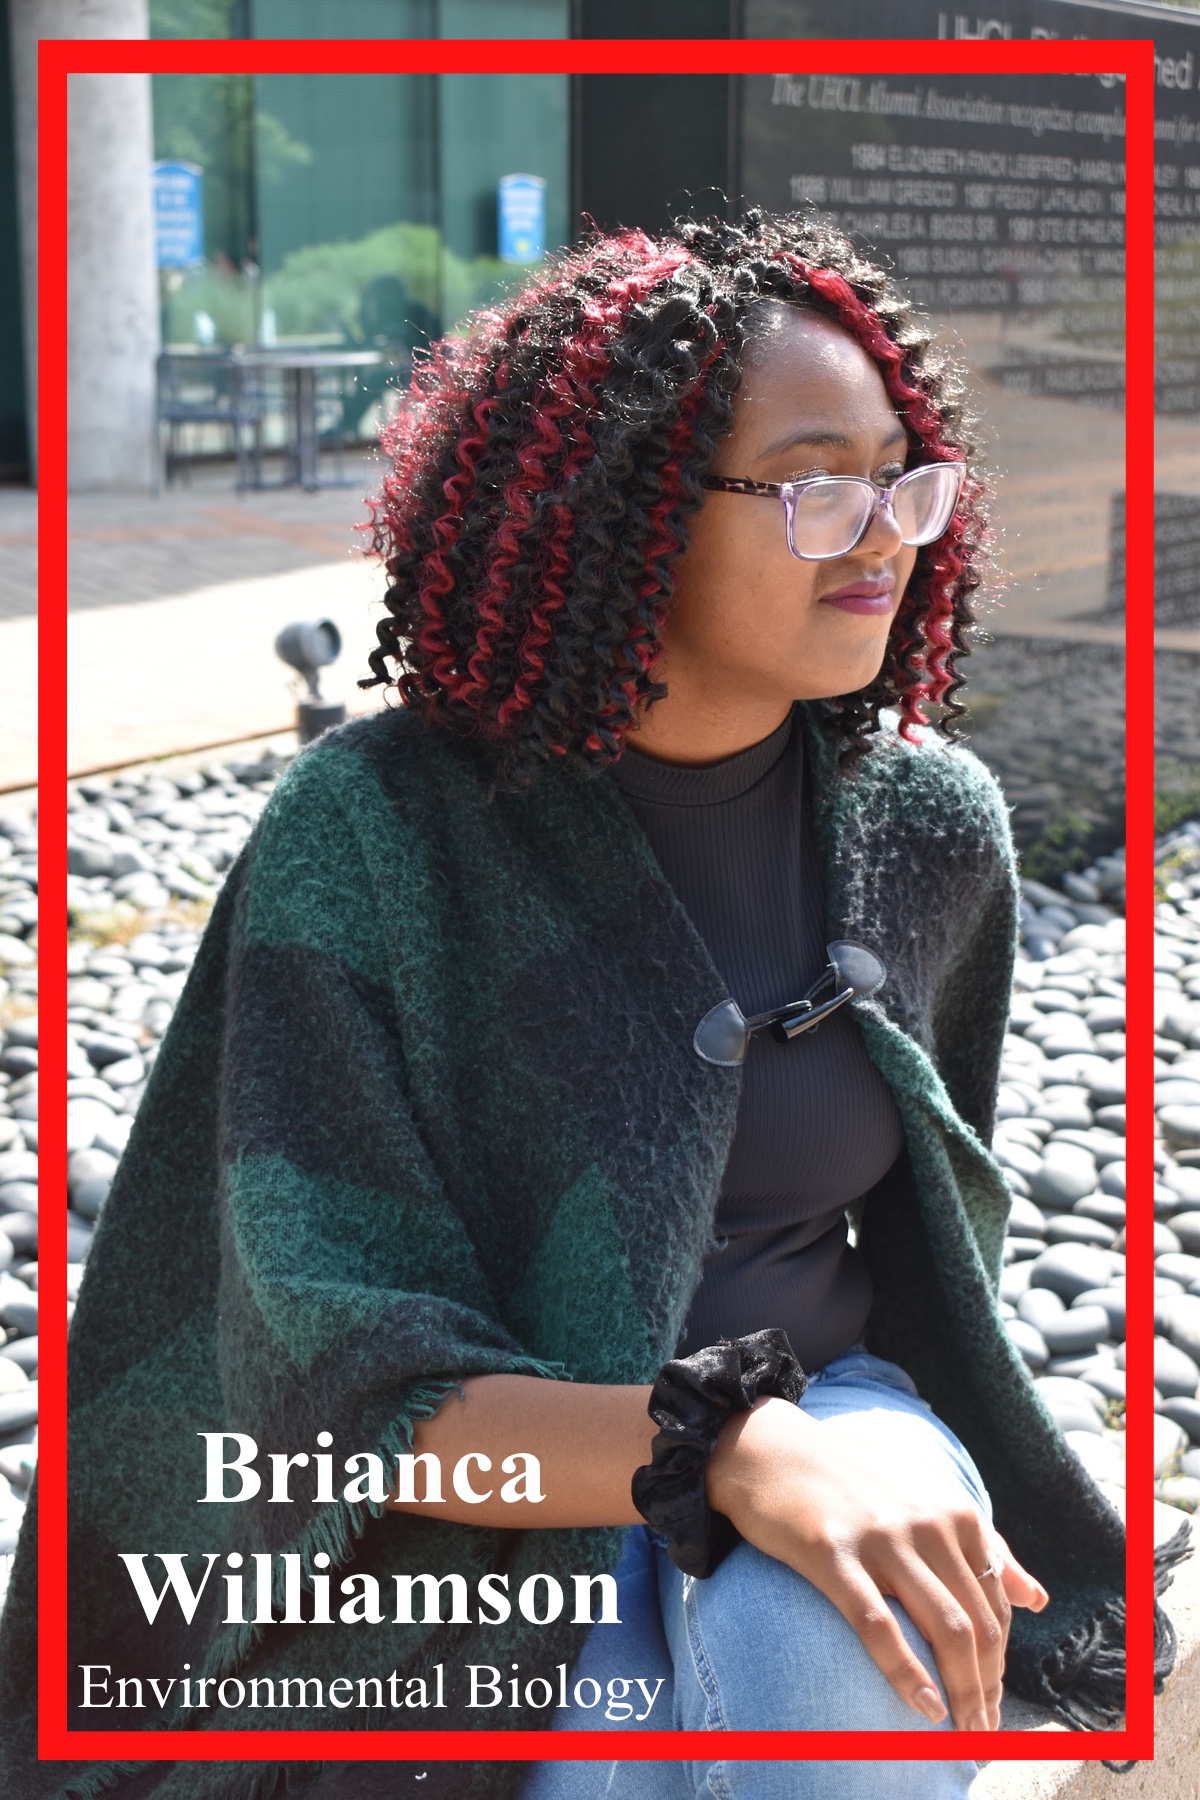 Brianca Williamson, Environmental Biology Major, sitting outside of SSCB. Sporting a black turtleneck an dark-green checkered shawl, surrounded by rocks.